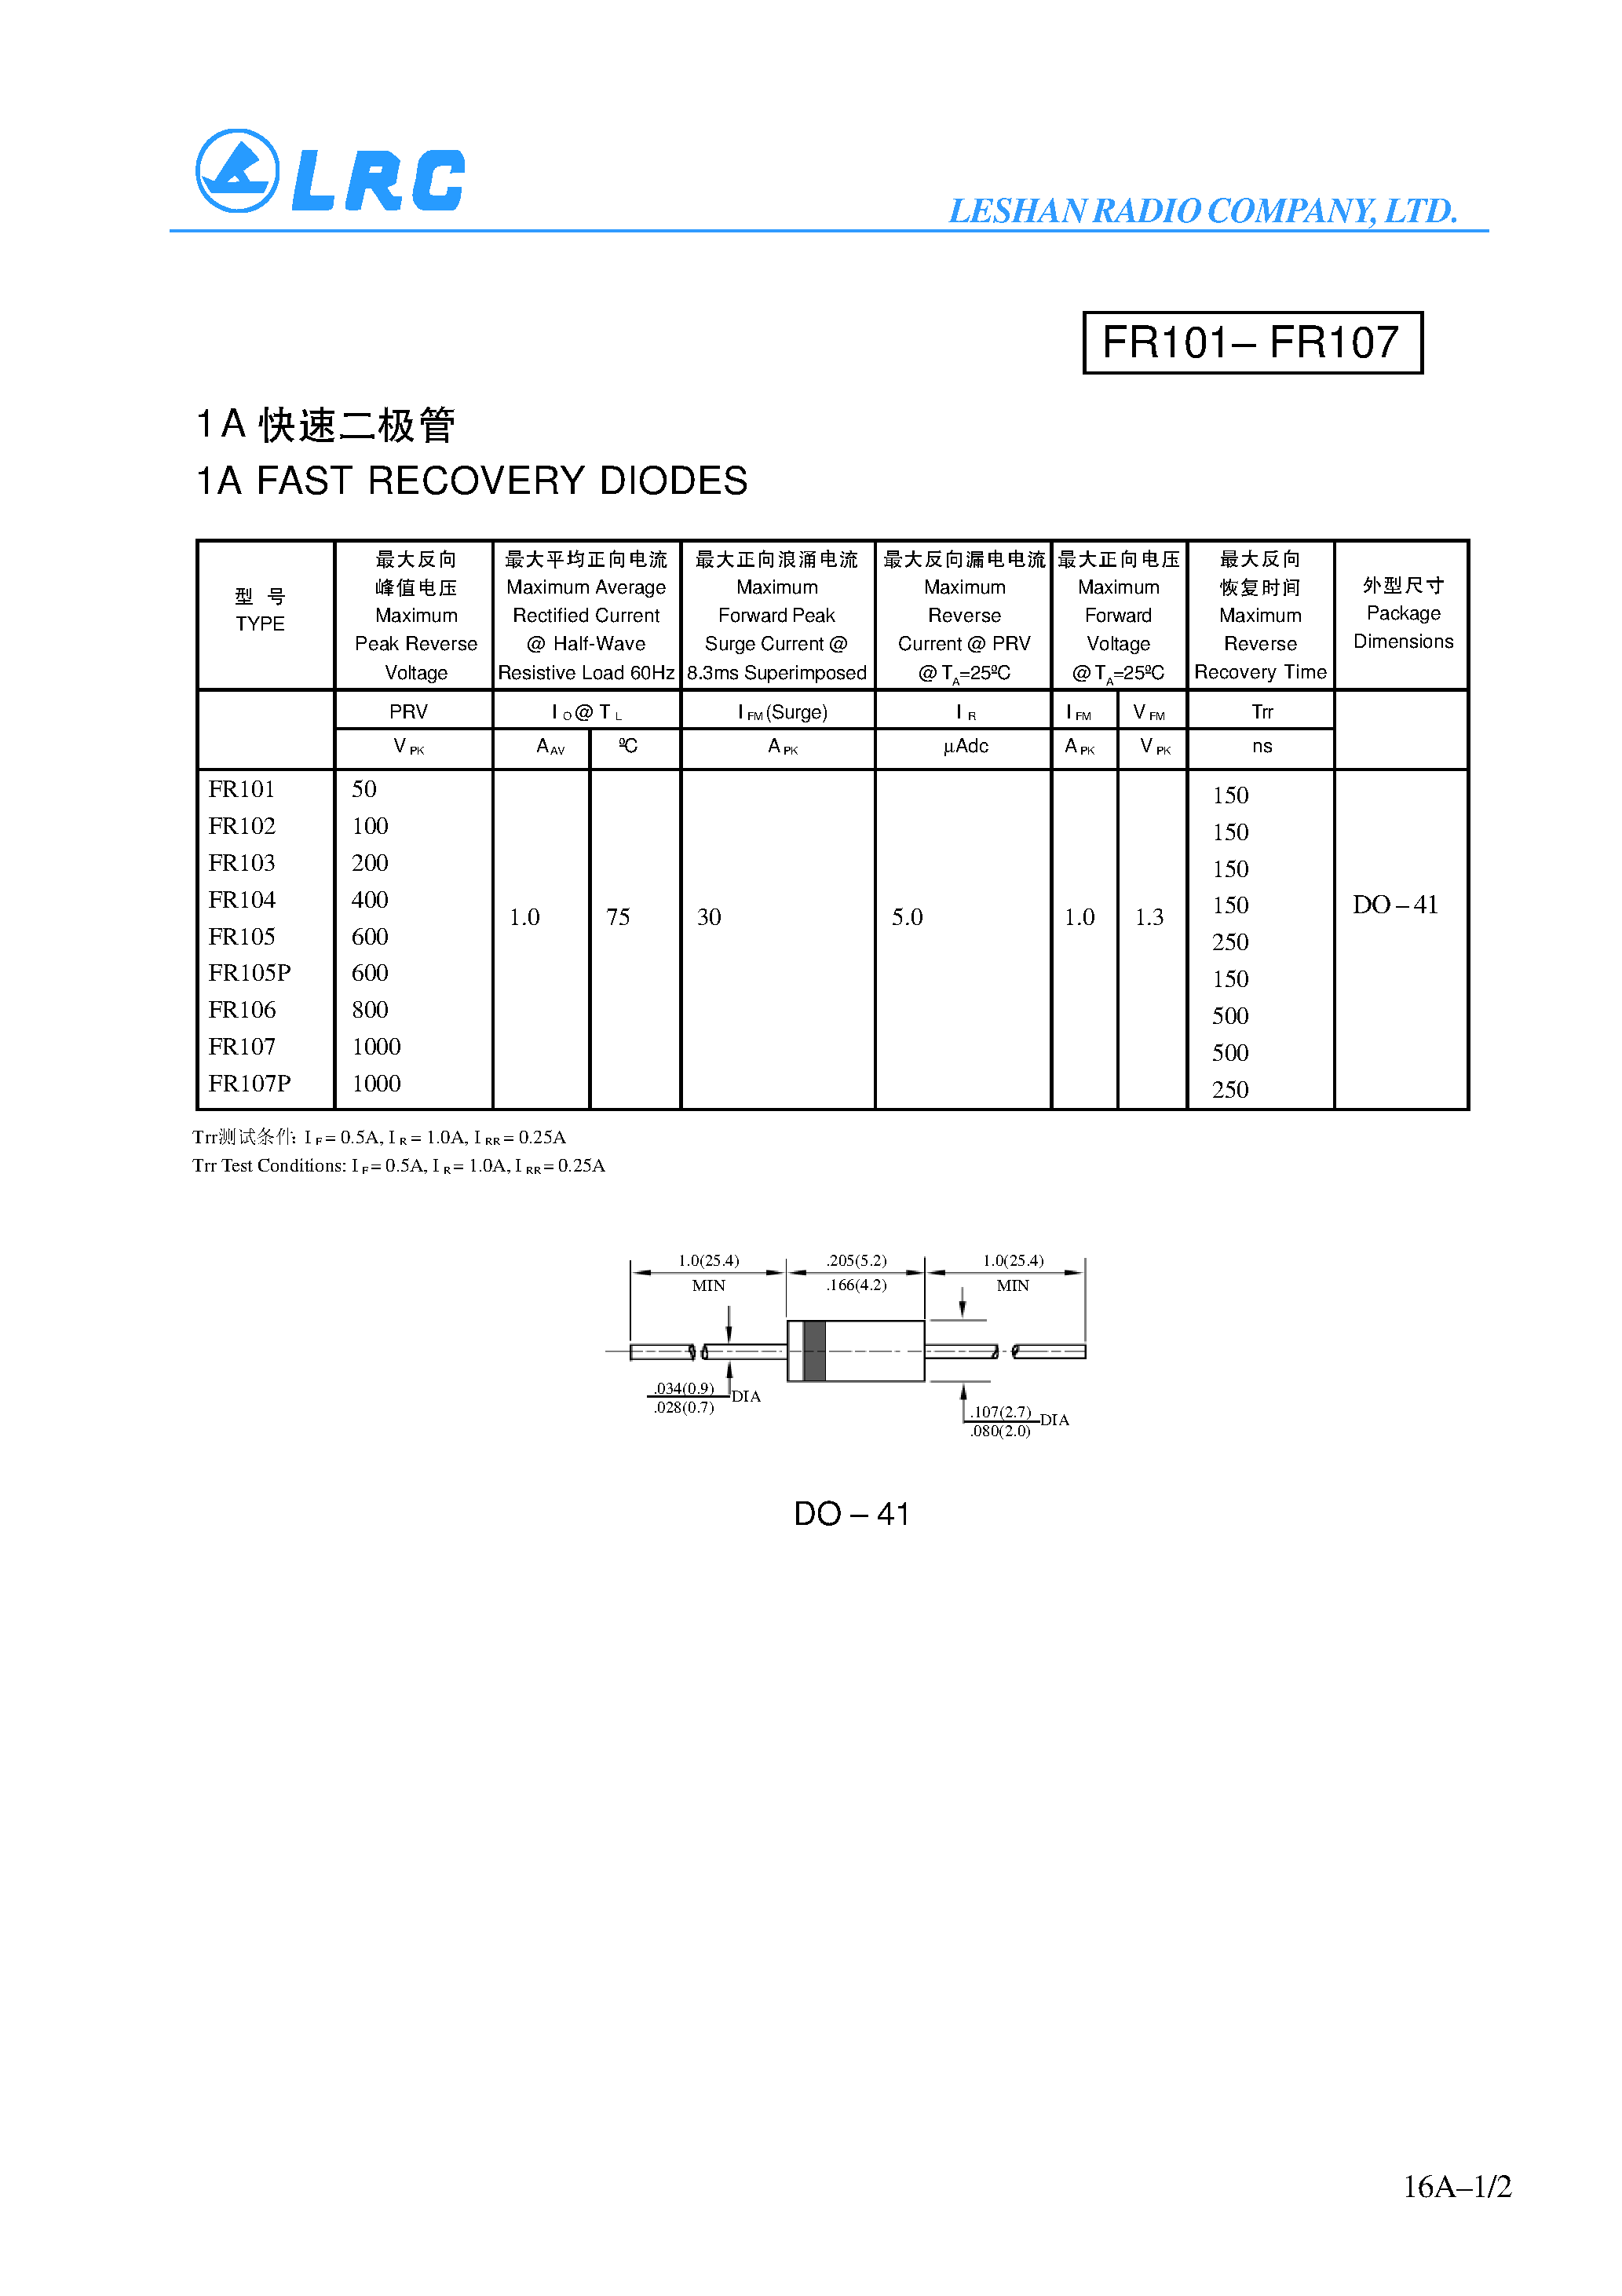 Datasheet FR101 - 1A FAST RECOVERY DIODES page 1